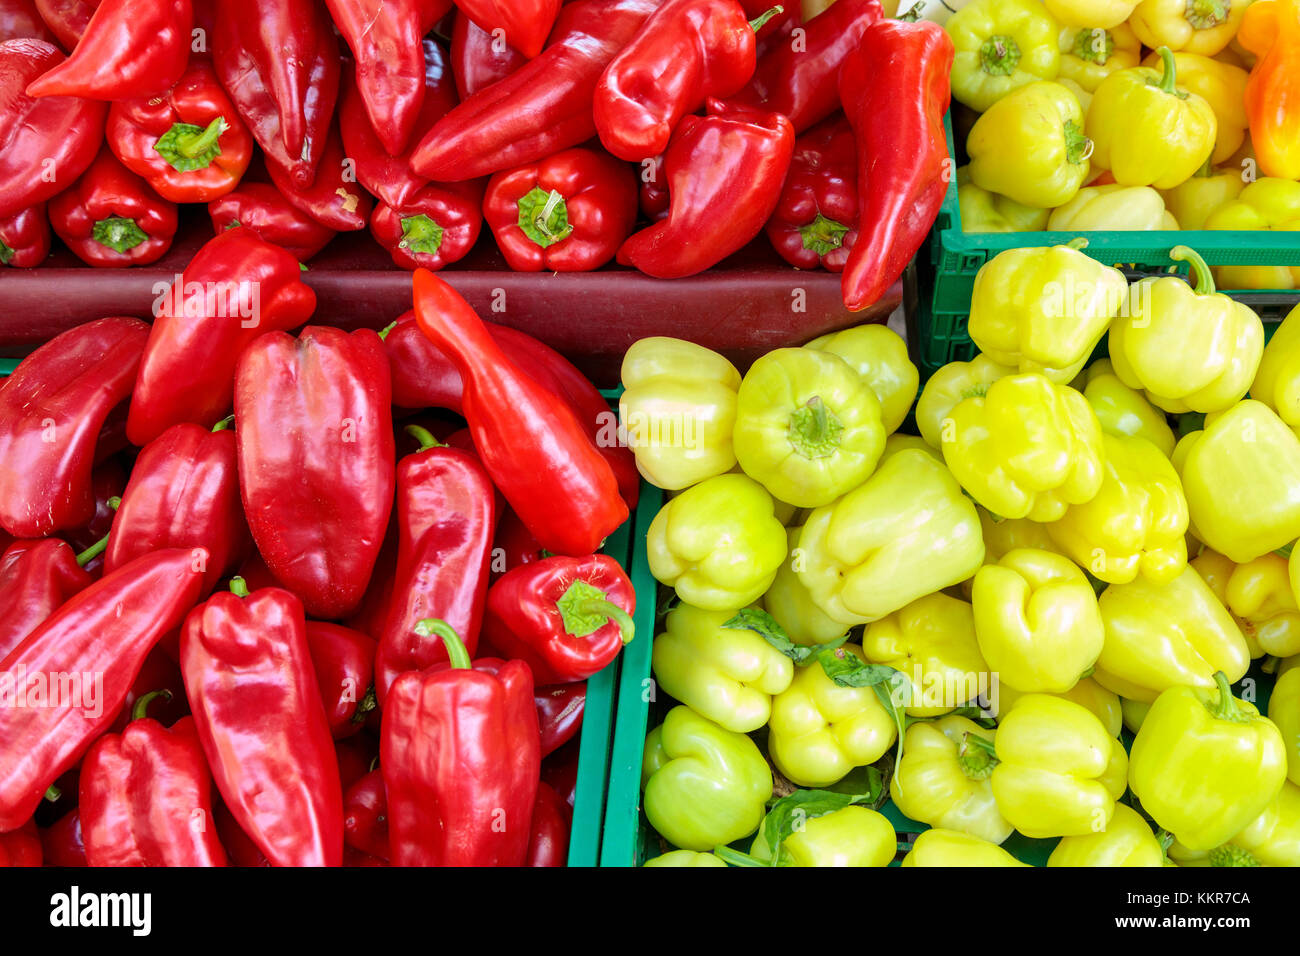 Red and yellow peppers on sale at the open-air market of Split, Dalmatia, Croatia Stock Photo